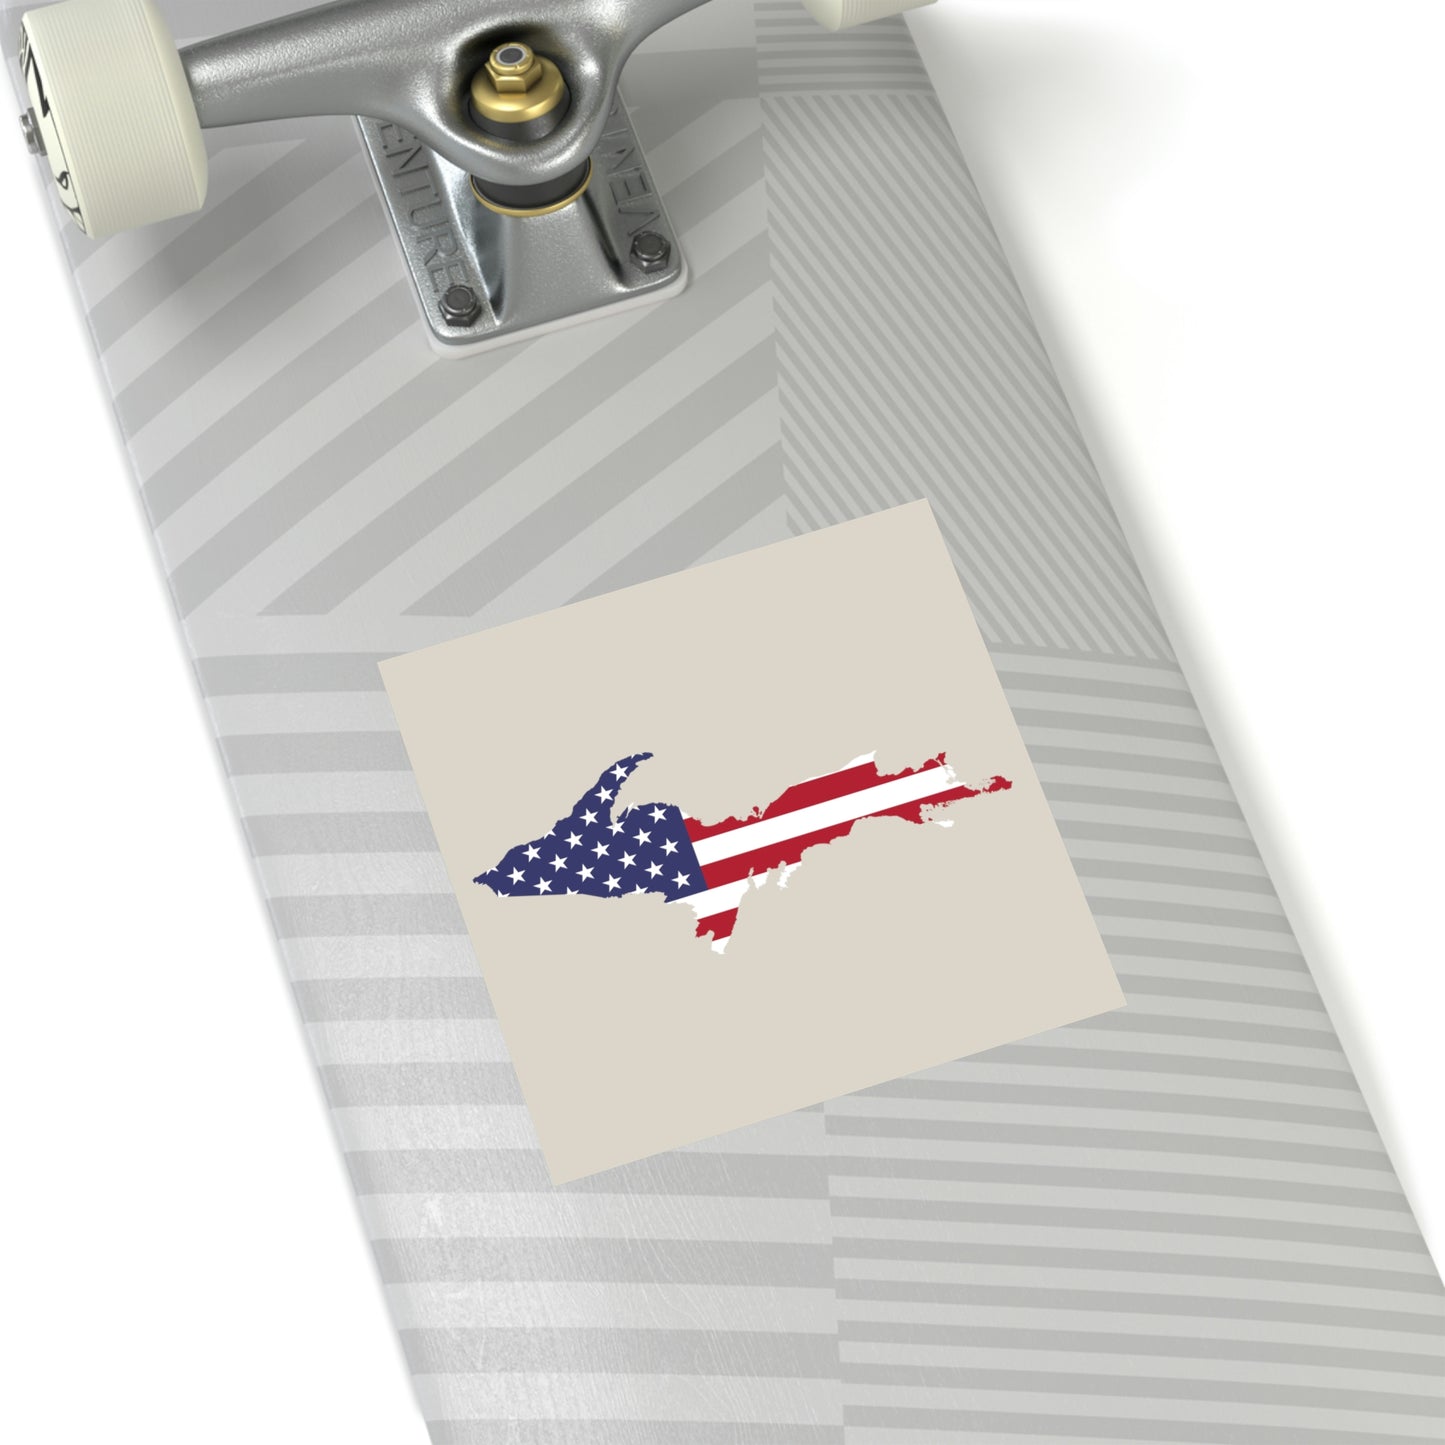 Michigan Upper Peninsula Square Sticker (Canvas Color w/ UP USA Flag Outline) | Indoor/Outdoor